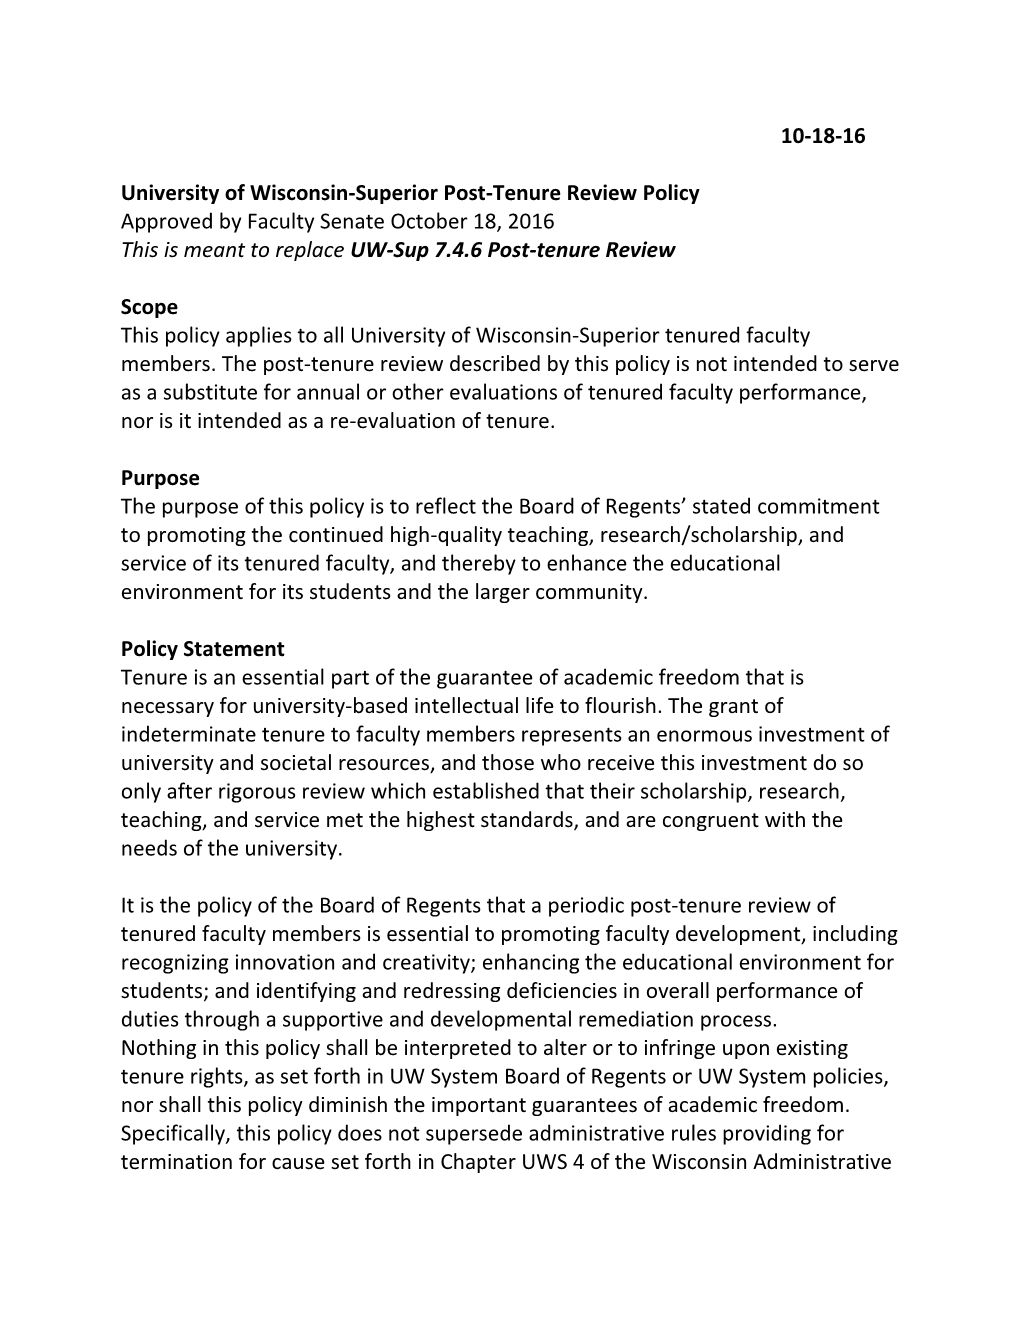 University of Wisconsin-Superior Post-Tenure Review Policy